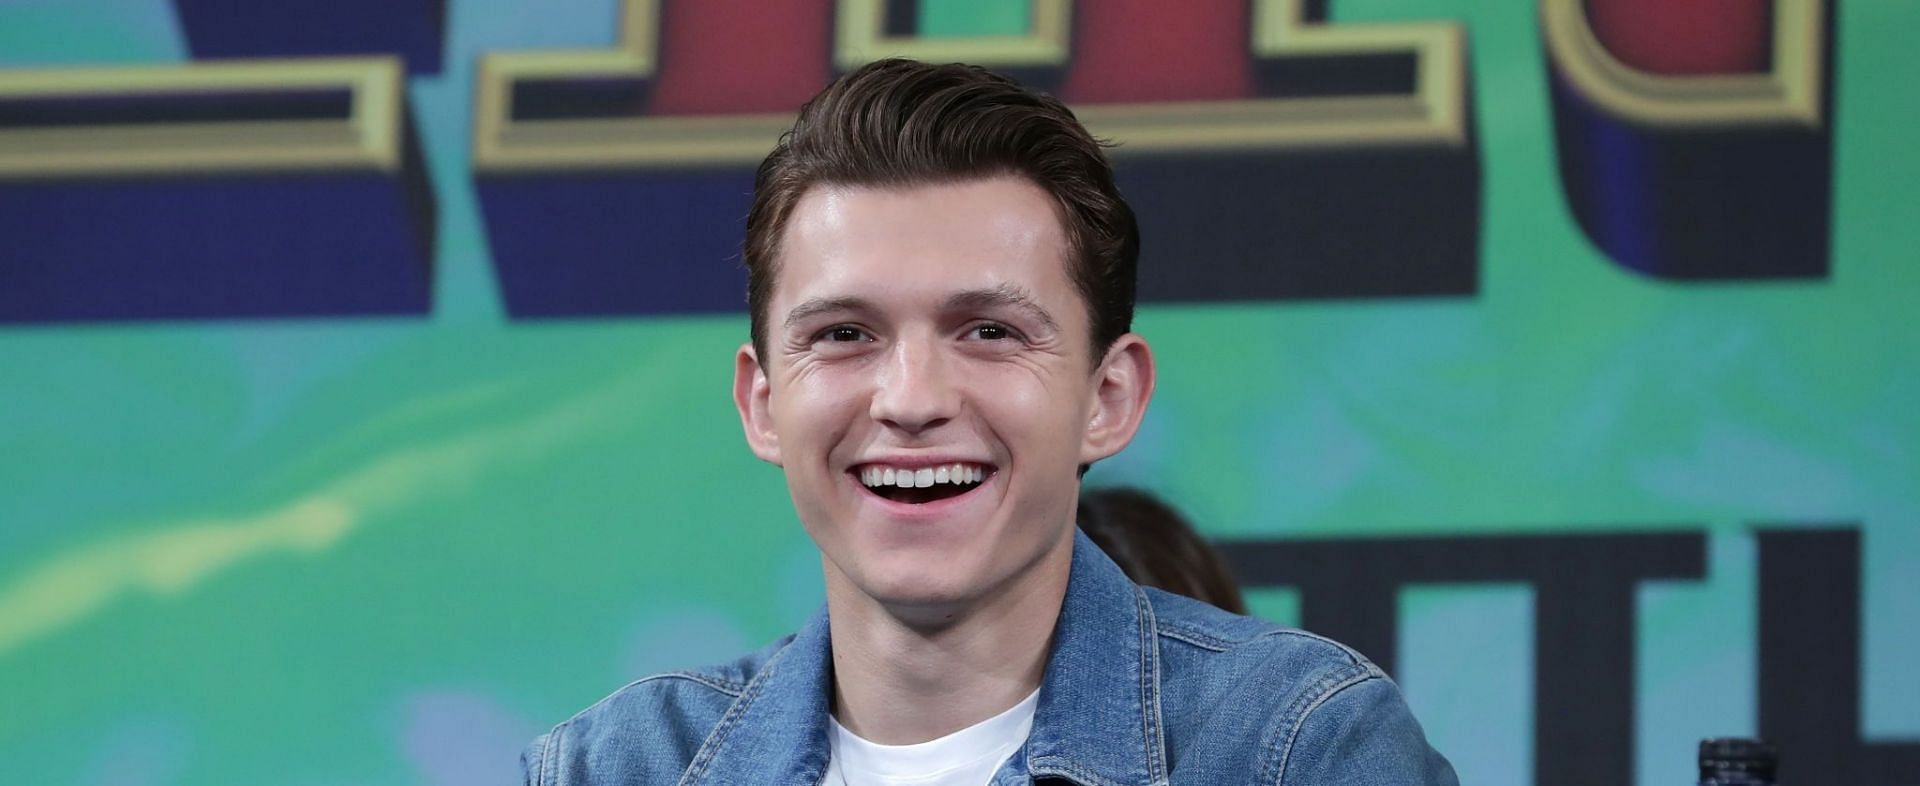 Fans are excited about the possibility of Tom Holland hosting the 94th Academy Awards (Image via Han Myung-Gu/WireImage)